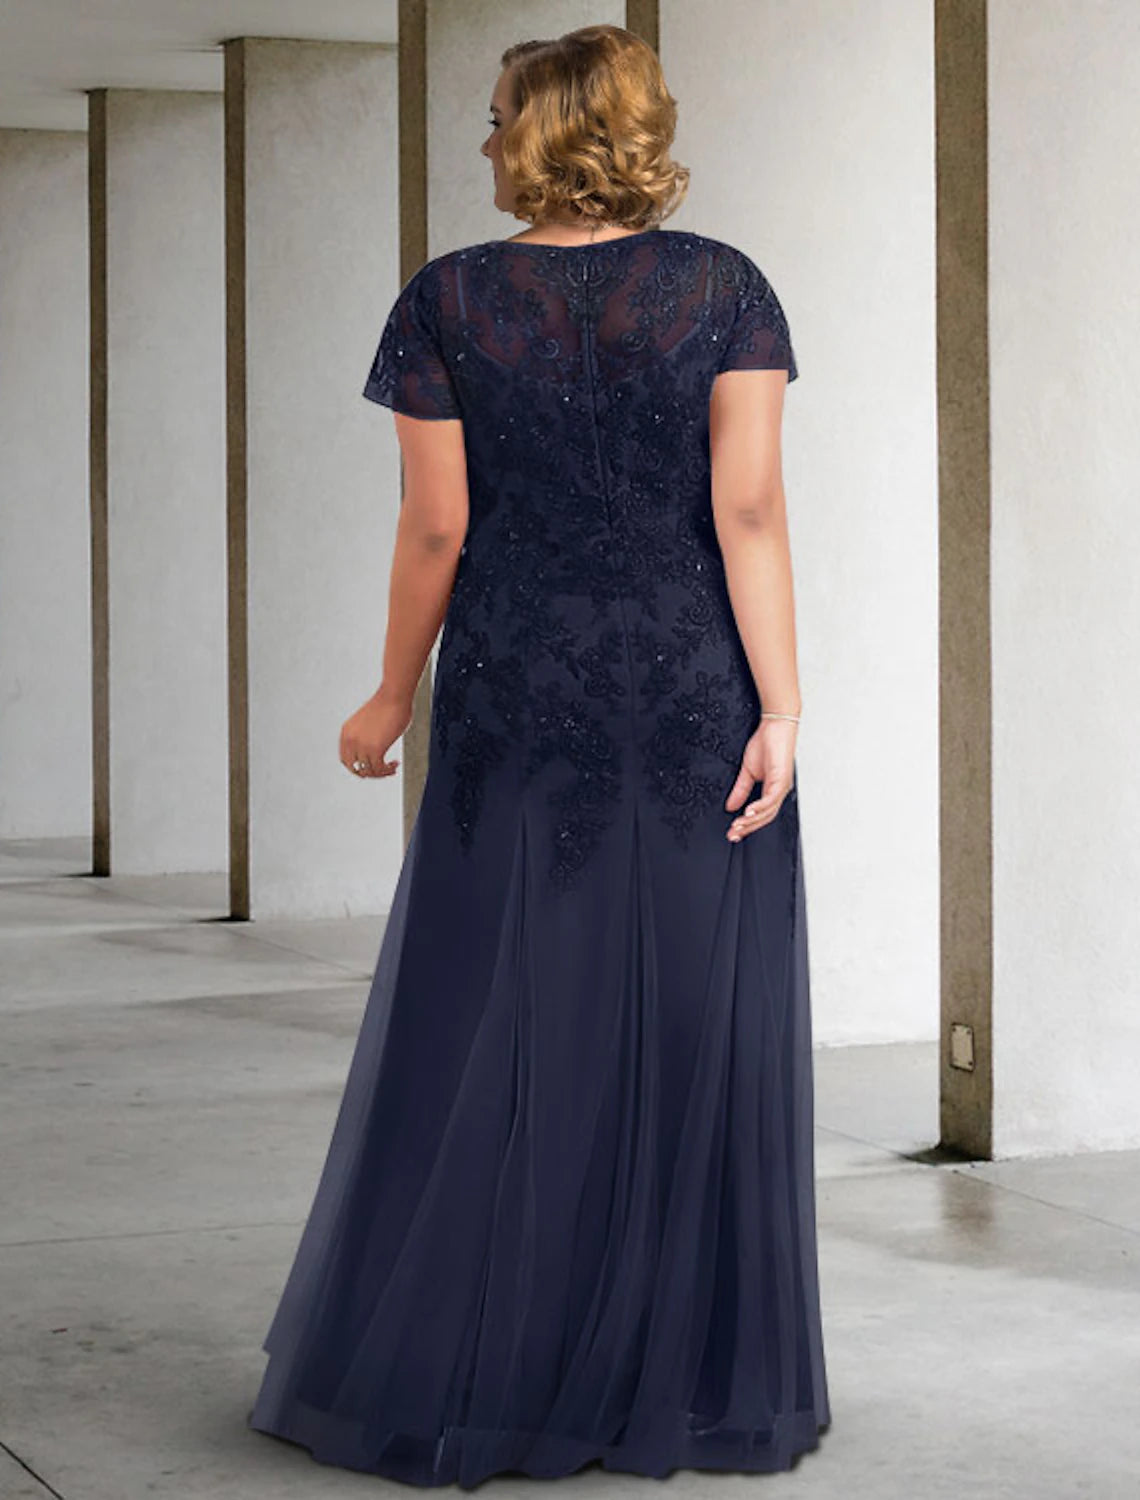 A-Line Mother of the Bride Dress Plus Size Elegant Jewel Neck Floor Length Lace Tulle Short Sleeve with Pleats Appliques